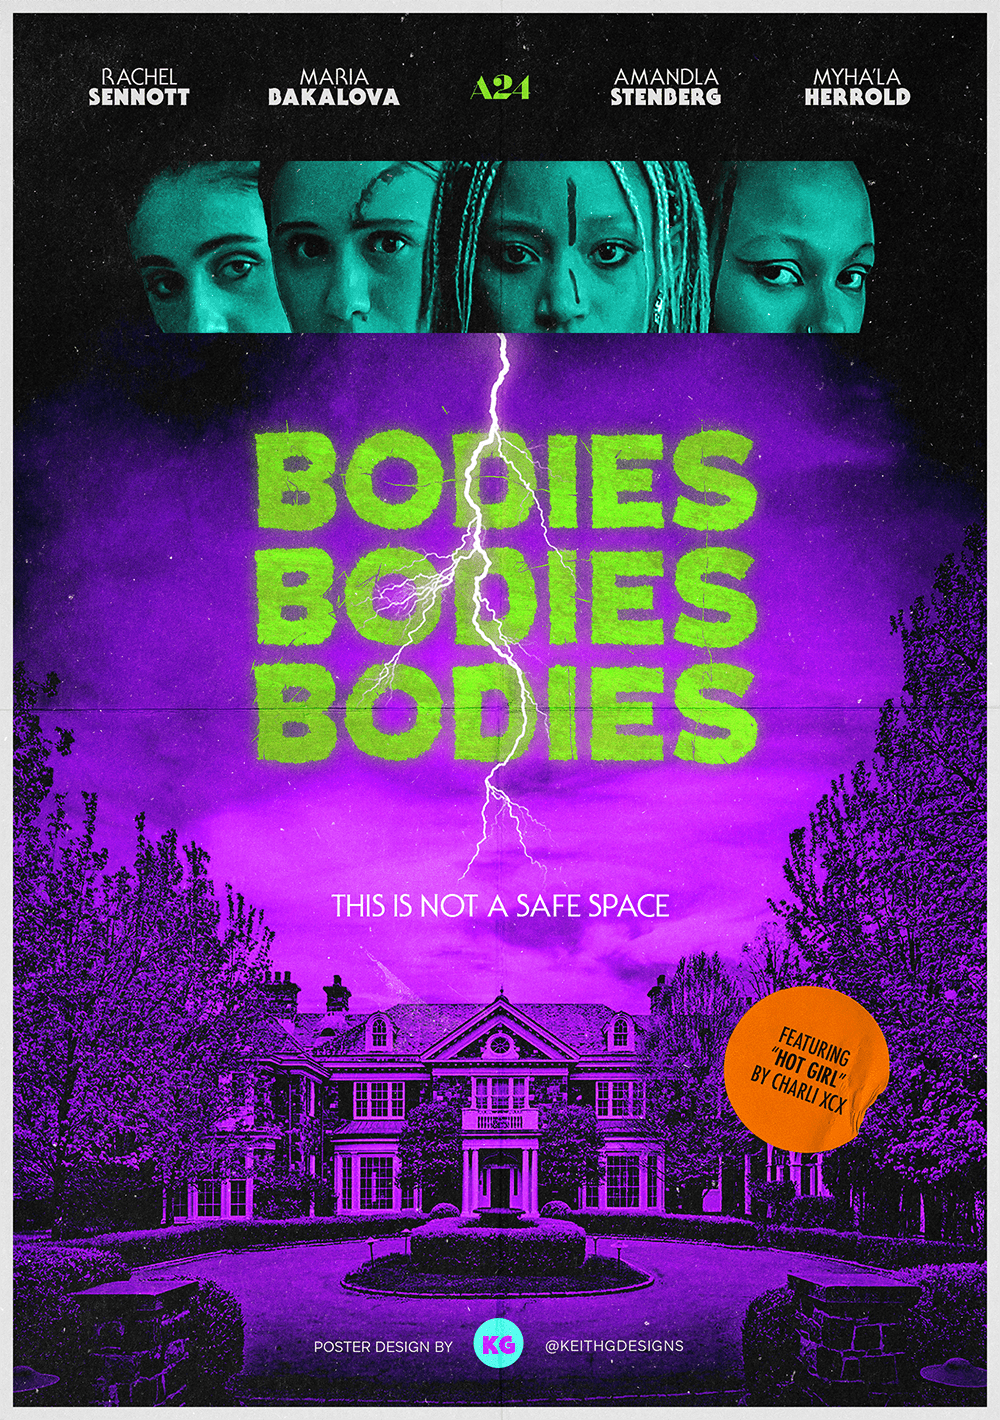 Bodies Bodies Bodies: It's All Fun and Games - Comic Watch